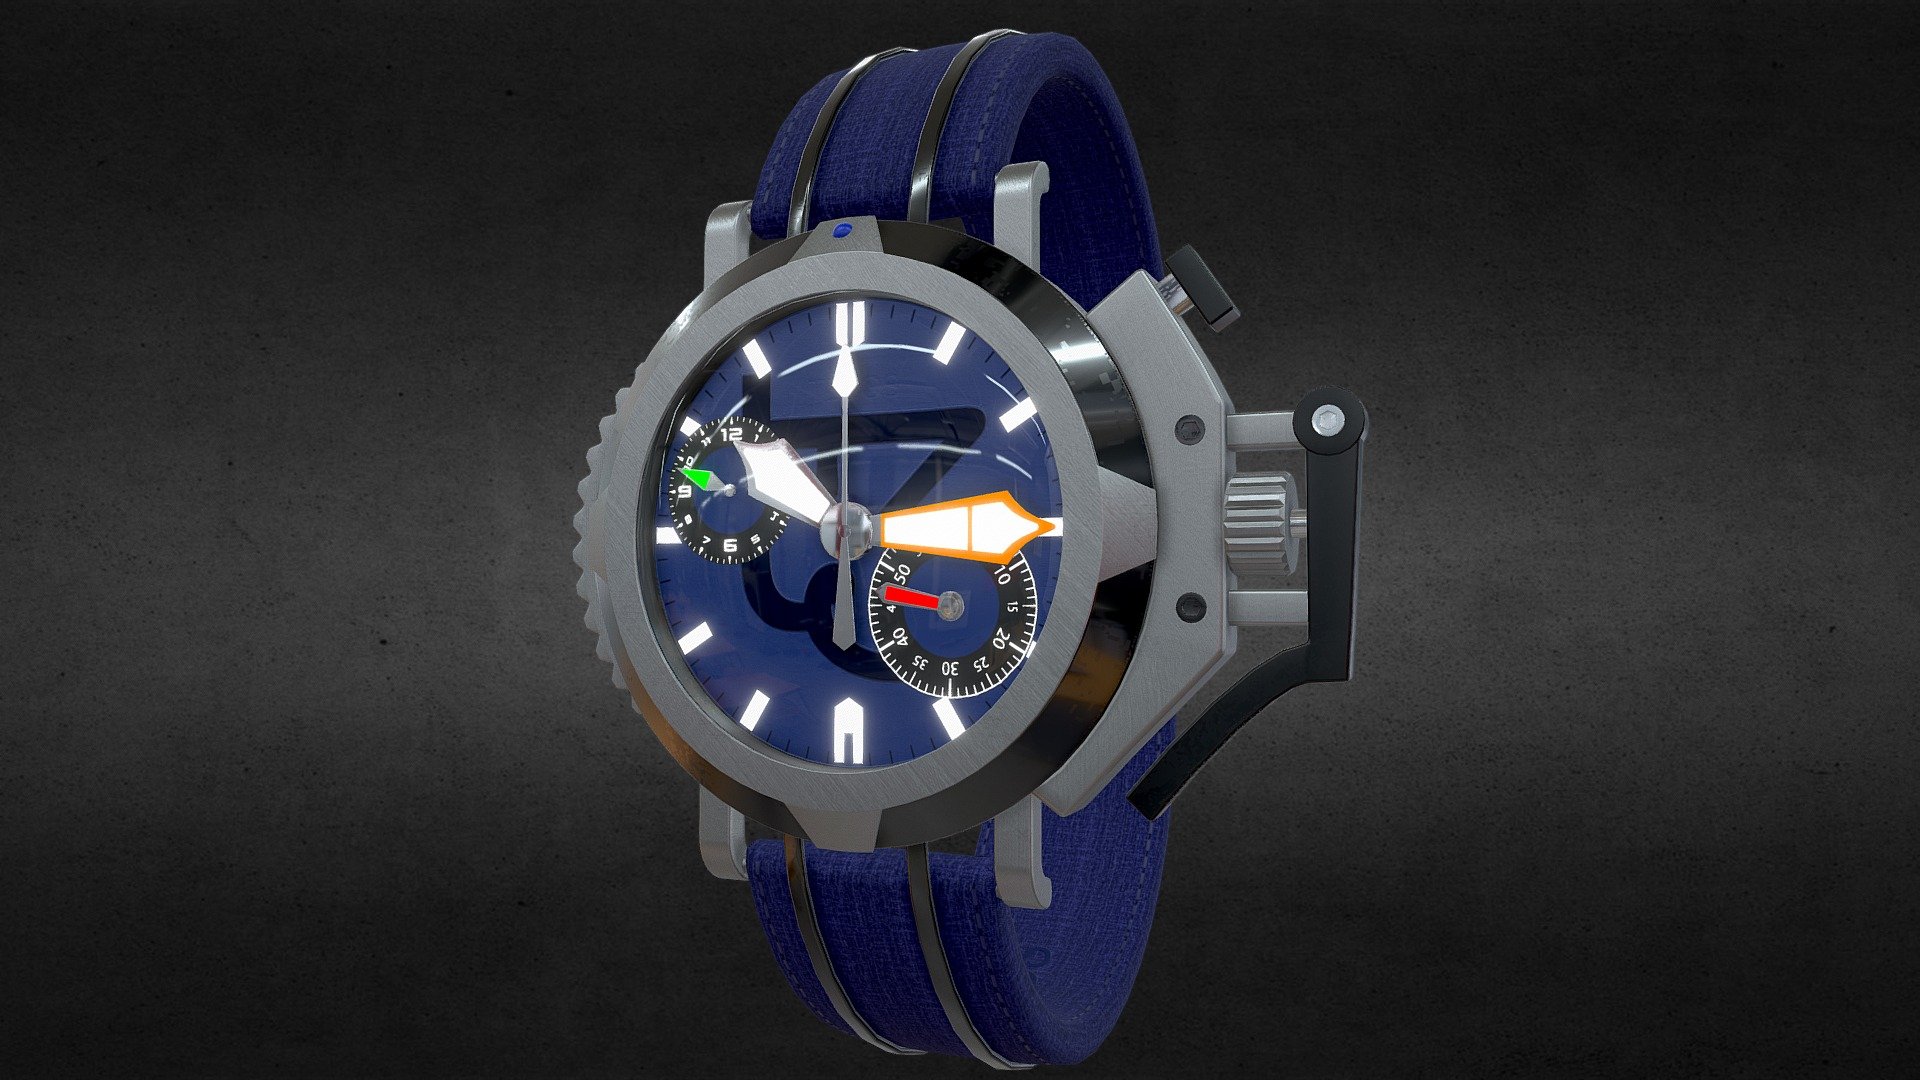 Awesome stainless steel Tezos Coin Watch

Currently available for download in FBX format.

3D model developed by AR-Watches 3d model